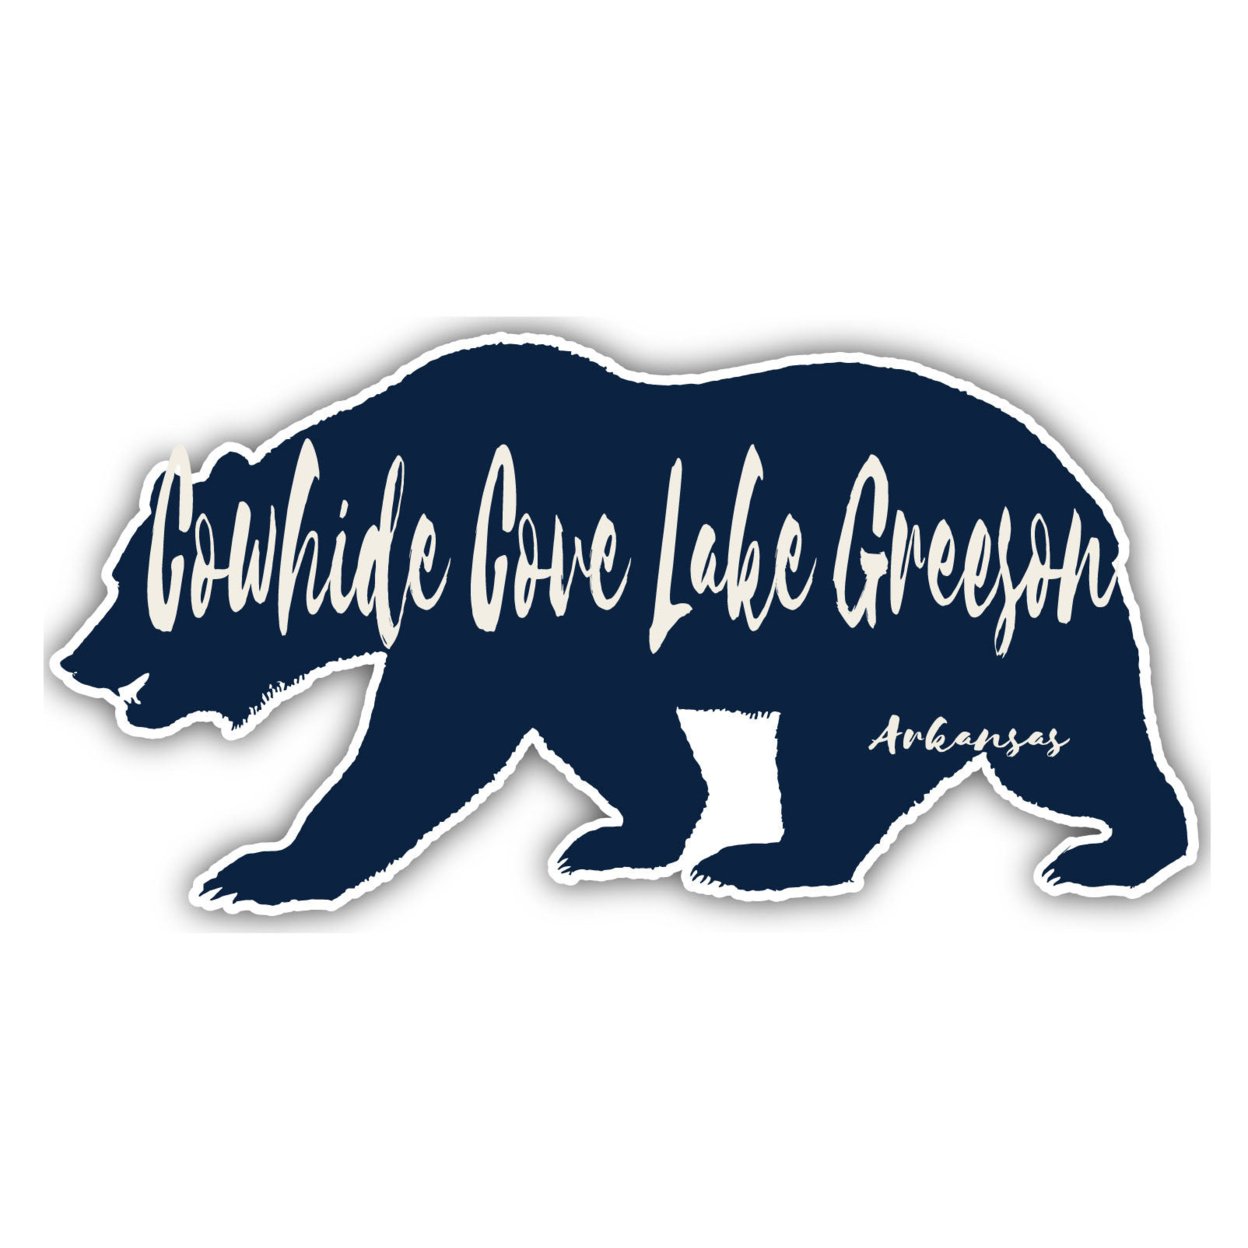 Cowhide Cove Lake Greeson Arkansas Souvenir Decorative Stickers (Choose Theme And Size) - 4-Pack, 6-Inch, Camp Life